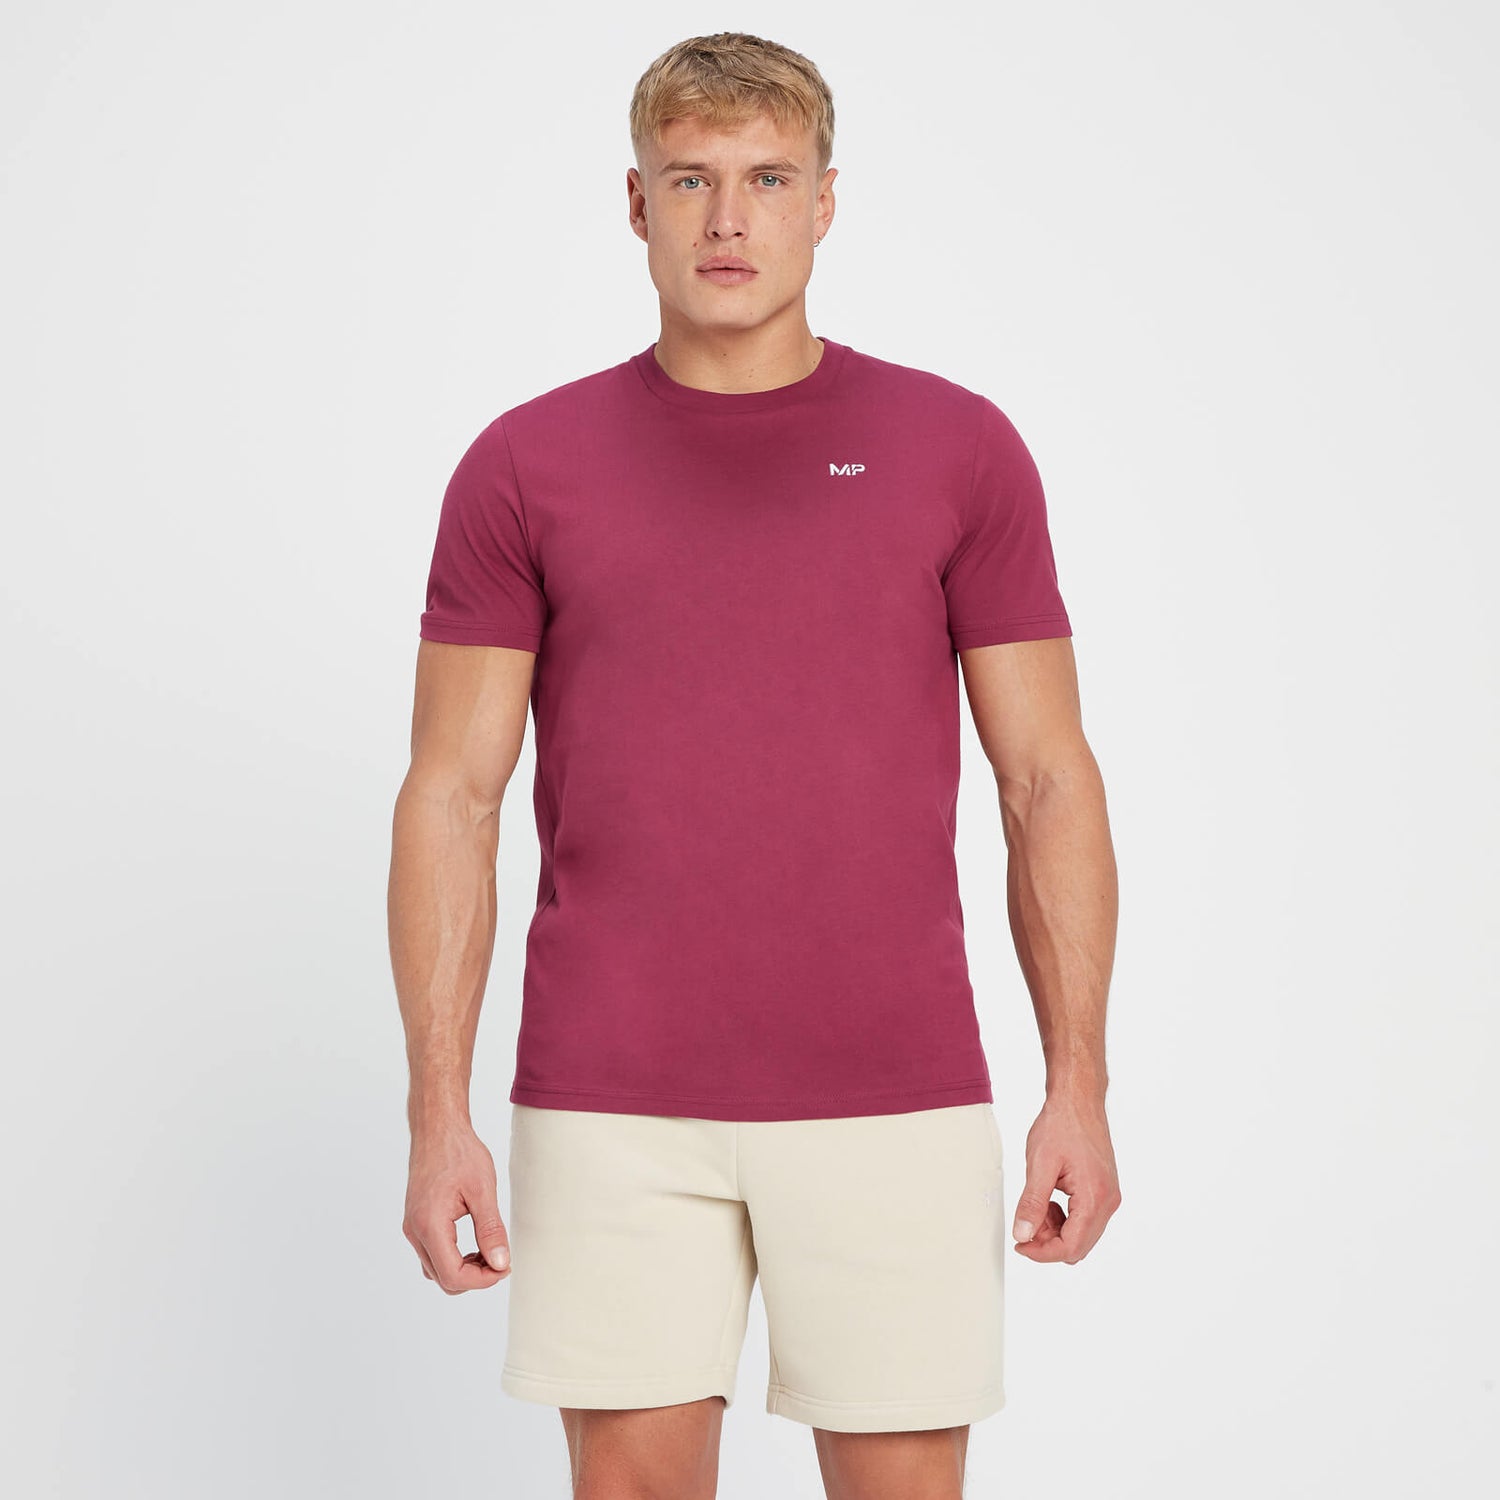 MP Men's Rest Day T-Shirt - Red Berry - S